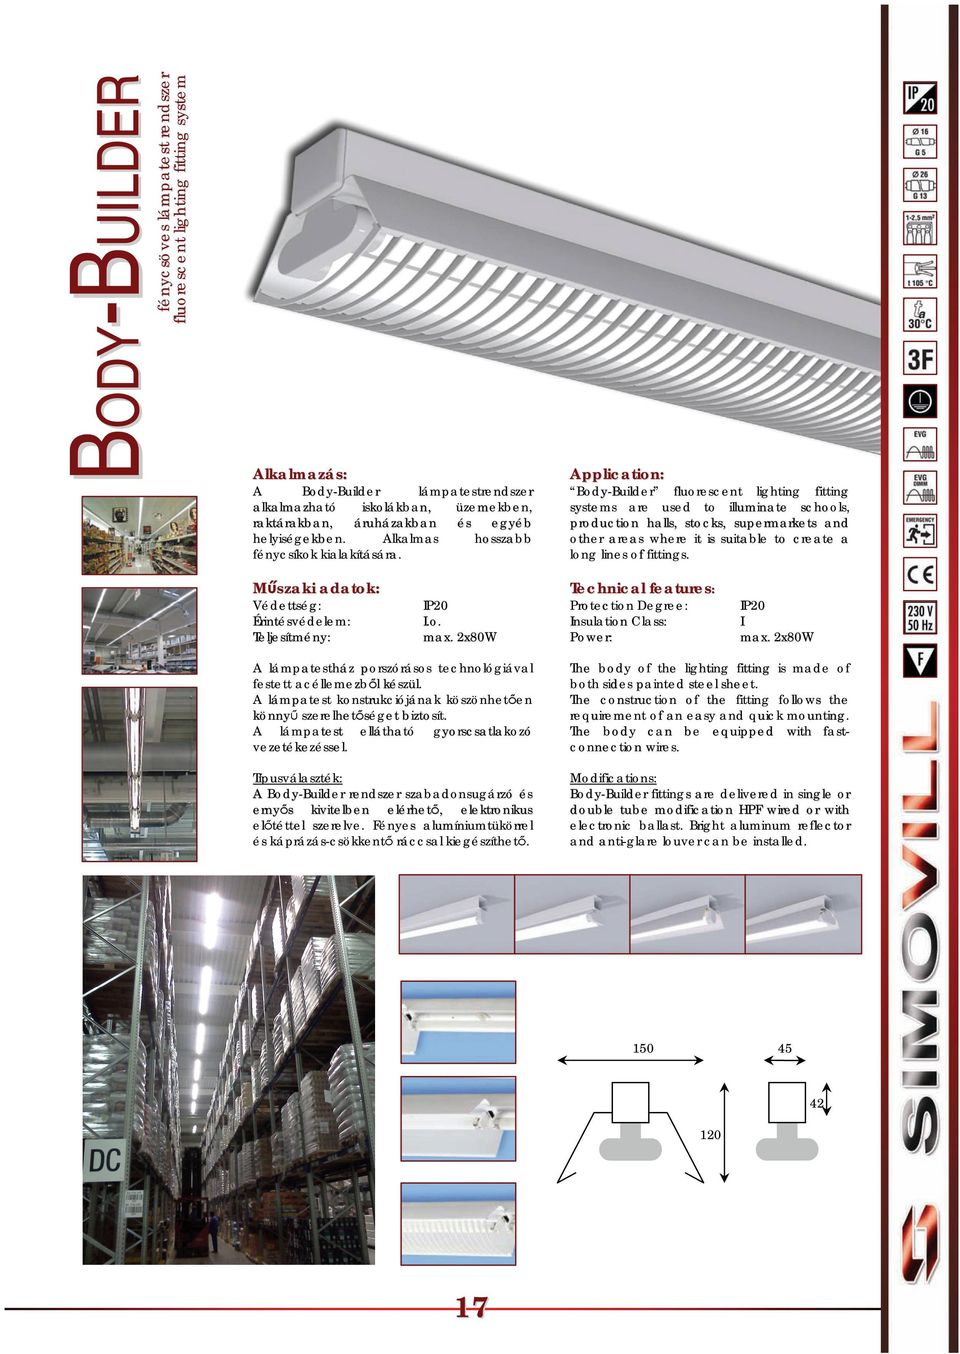 Body-Builder fluorescent lighting fitting systems are used to illuminate schools, production halls, stocks, supermarkets and other areas where it is suitable to create a long lines of fittings.